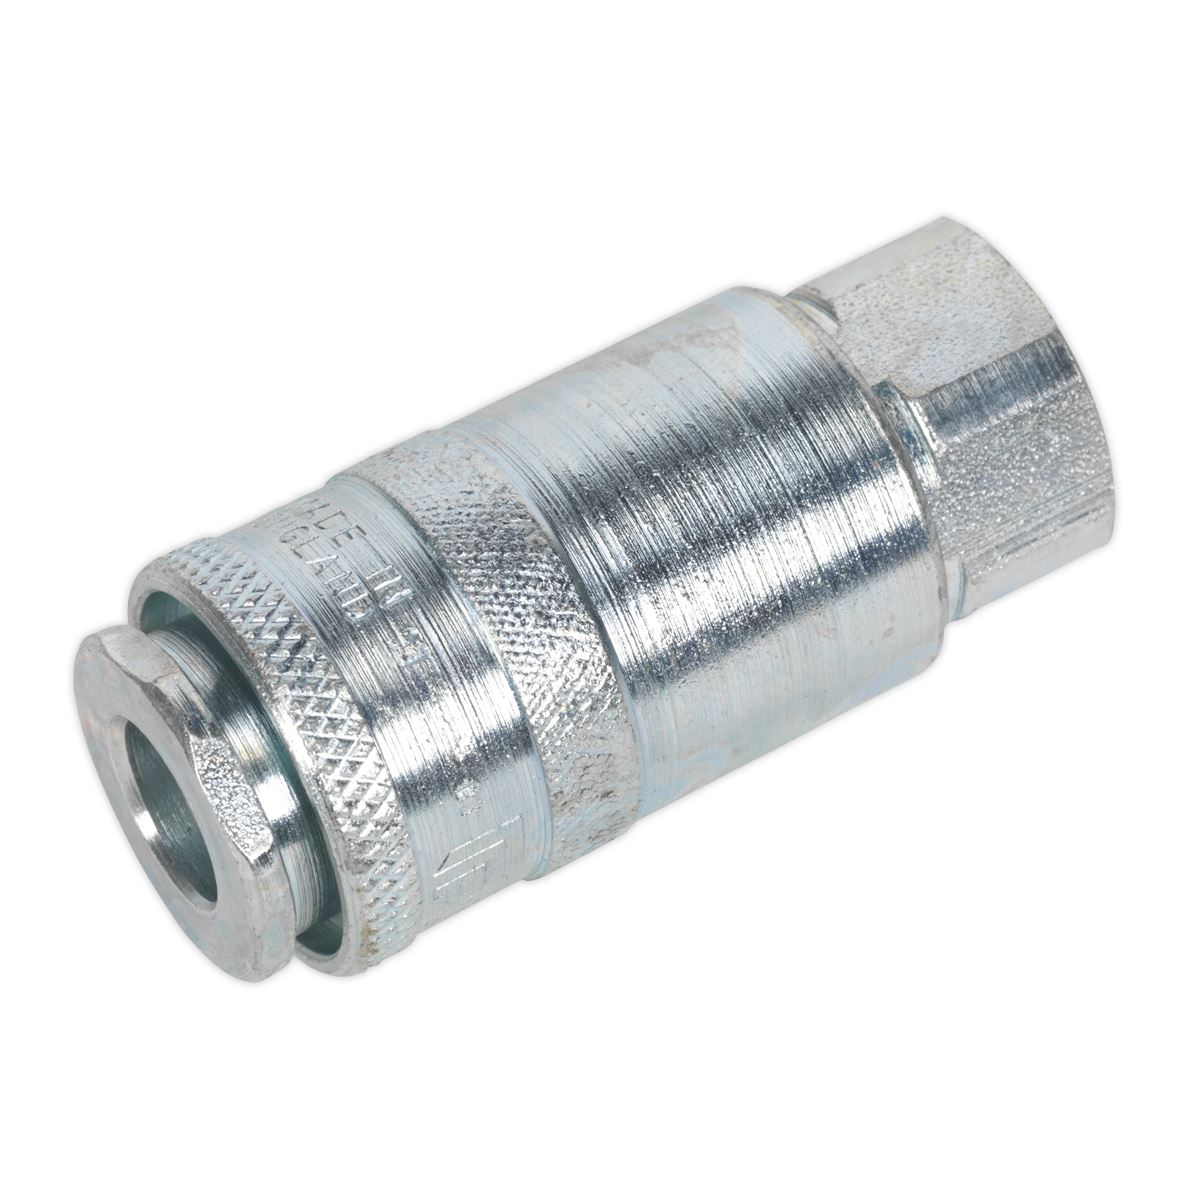 PCL Coupling Body Female 3/8"BSP